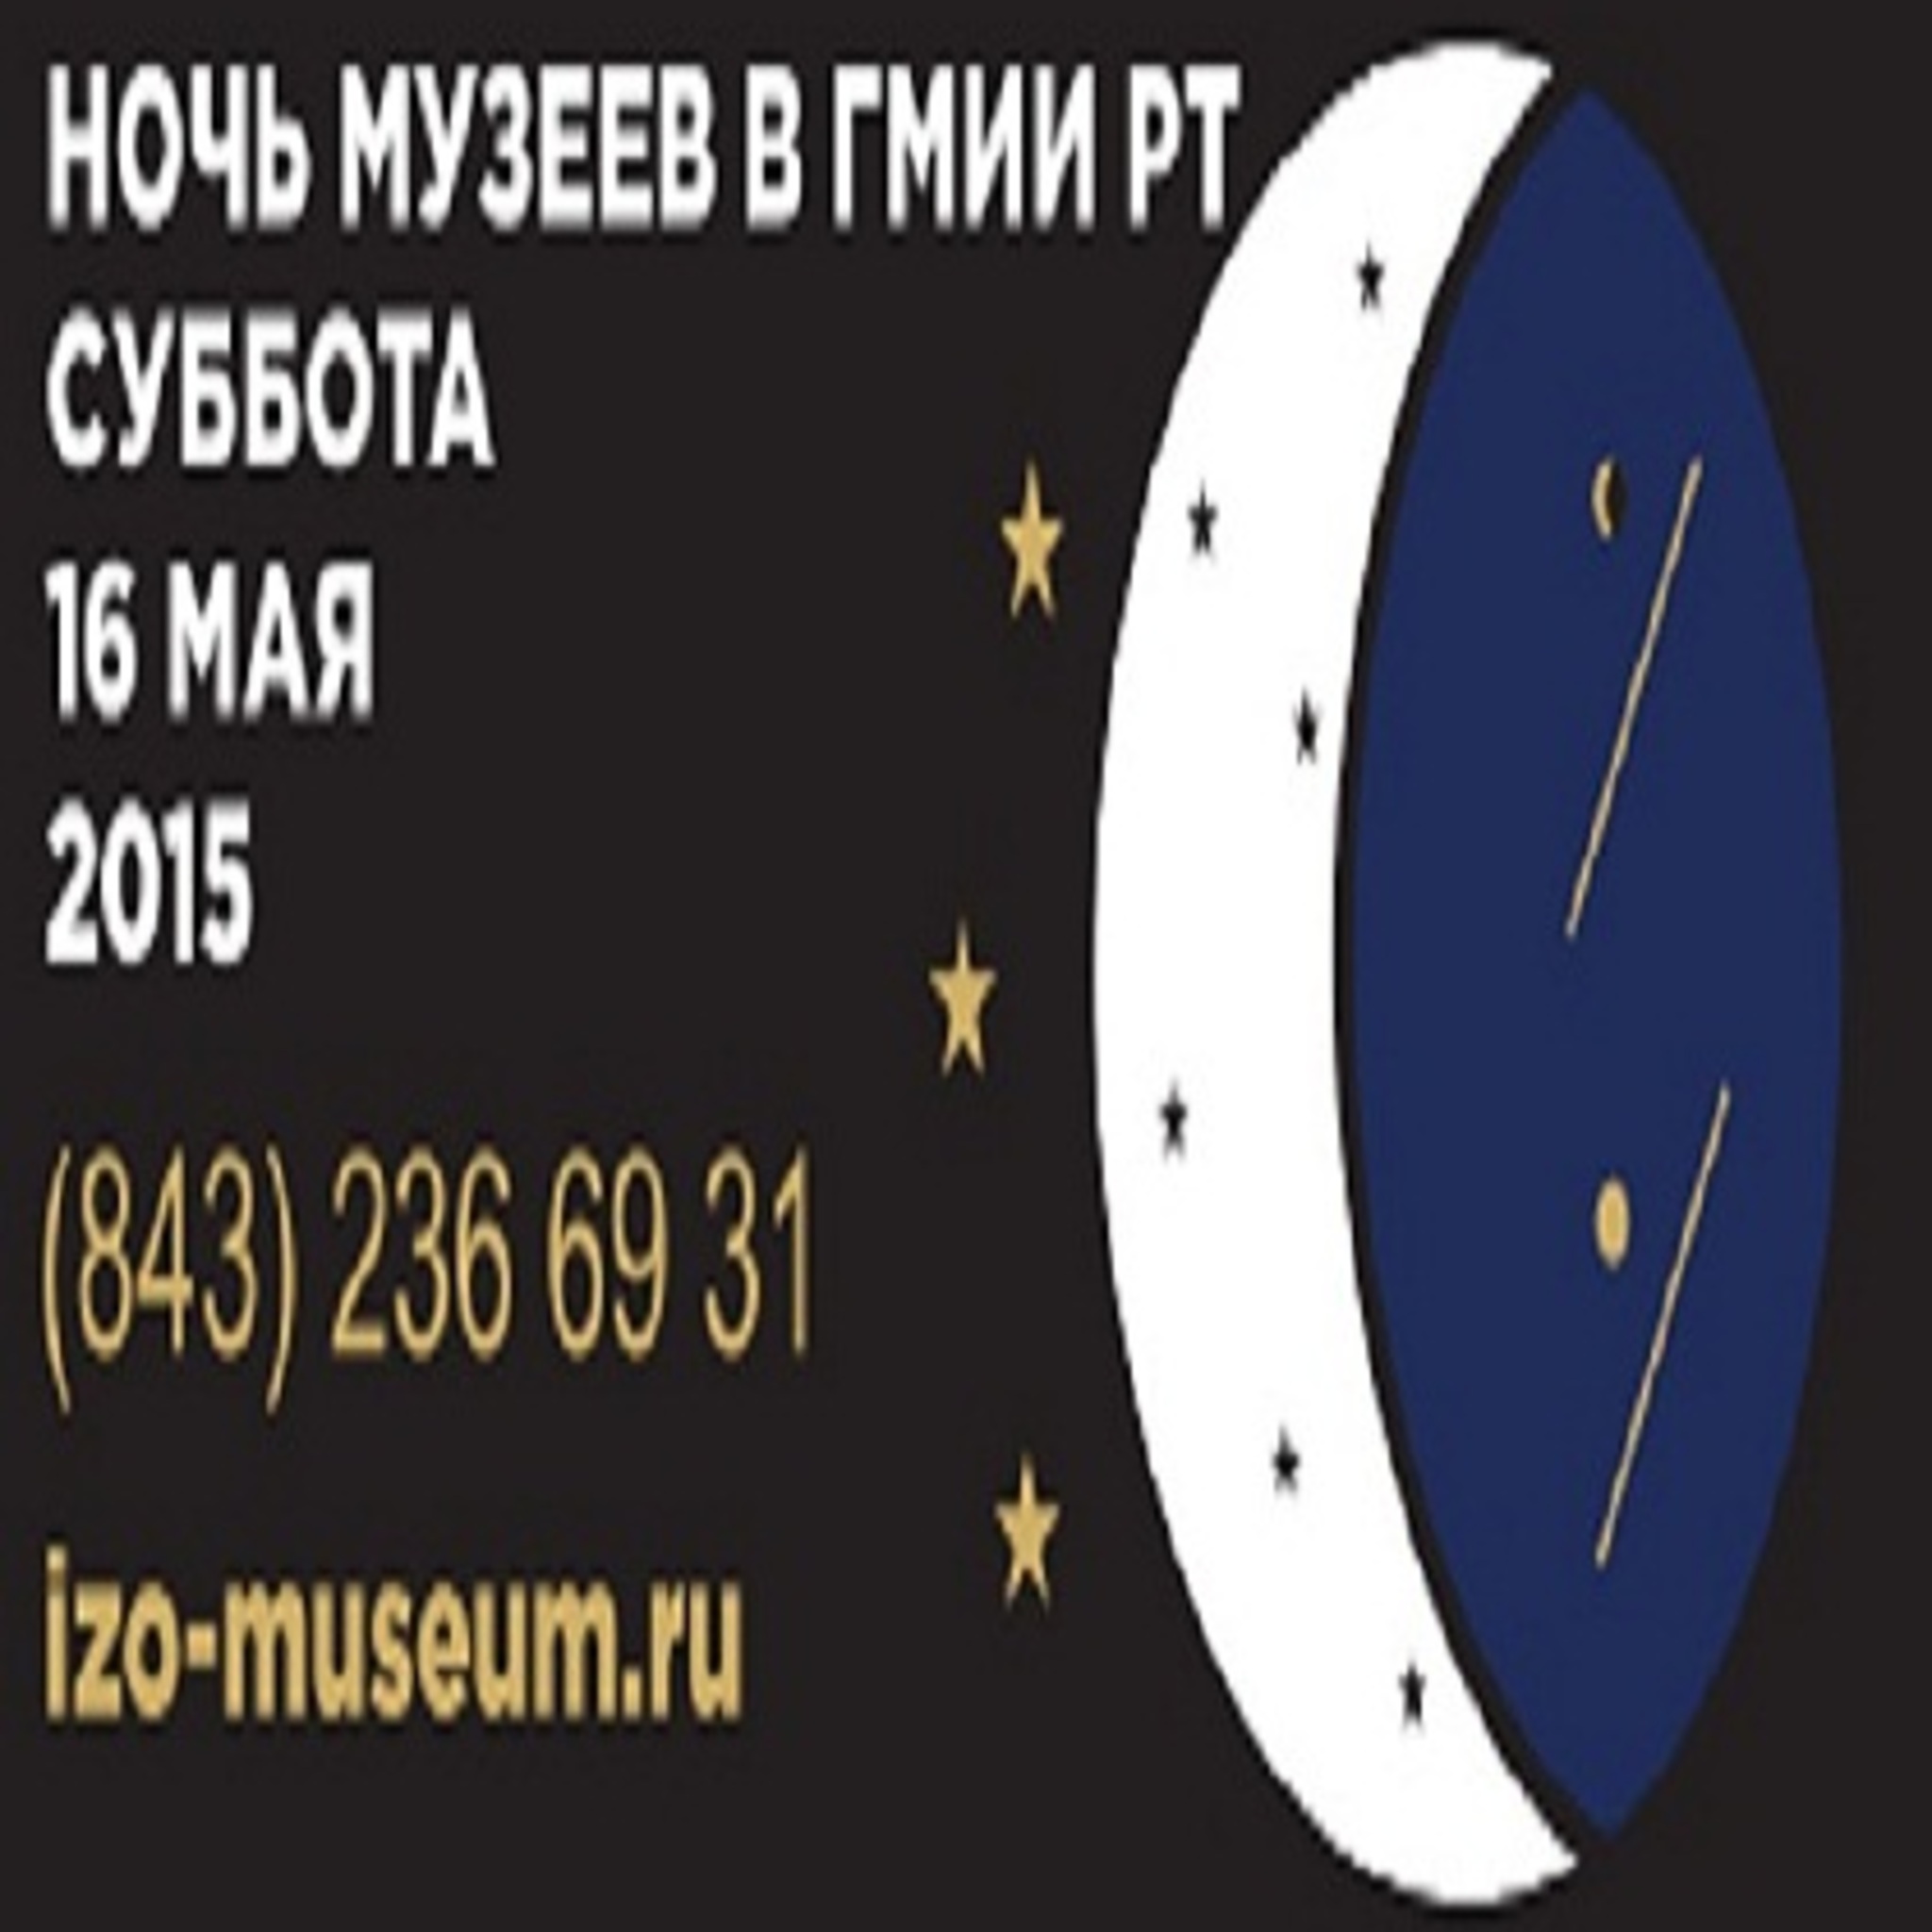 Night at the Museum in 2015 at the State Museum of Fine Arts of the Republic of Tatarstan